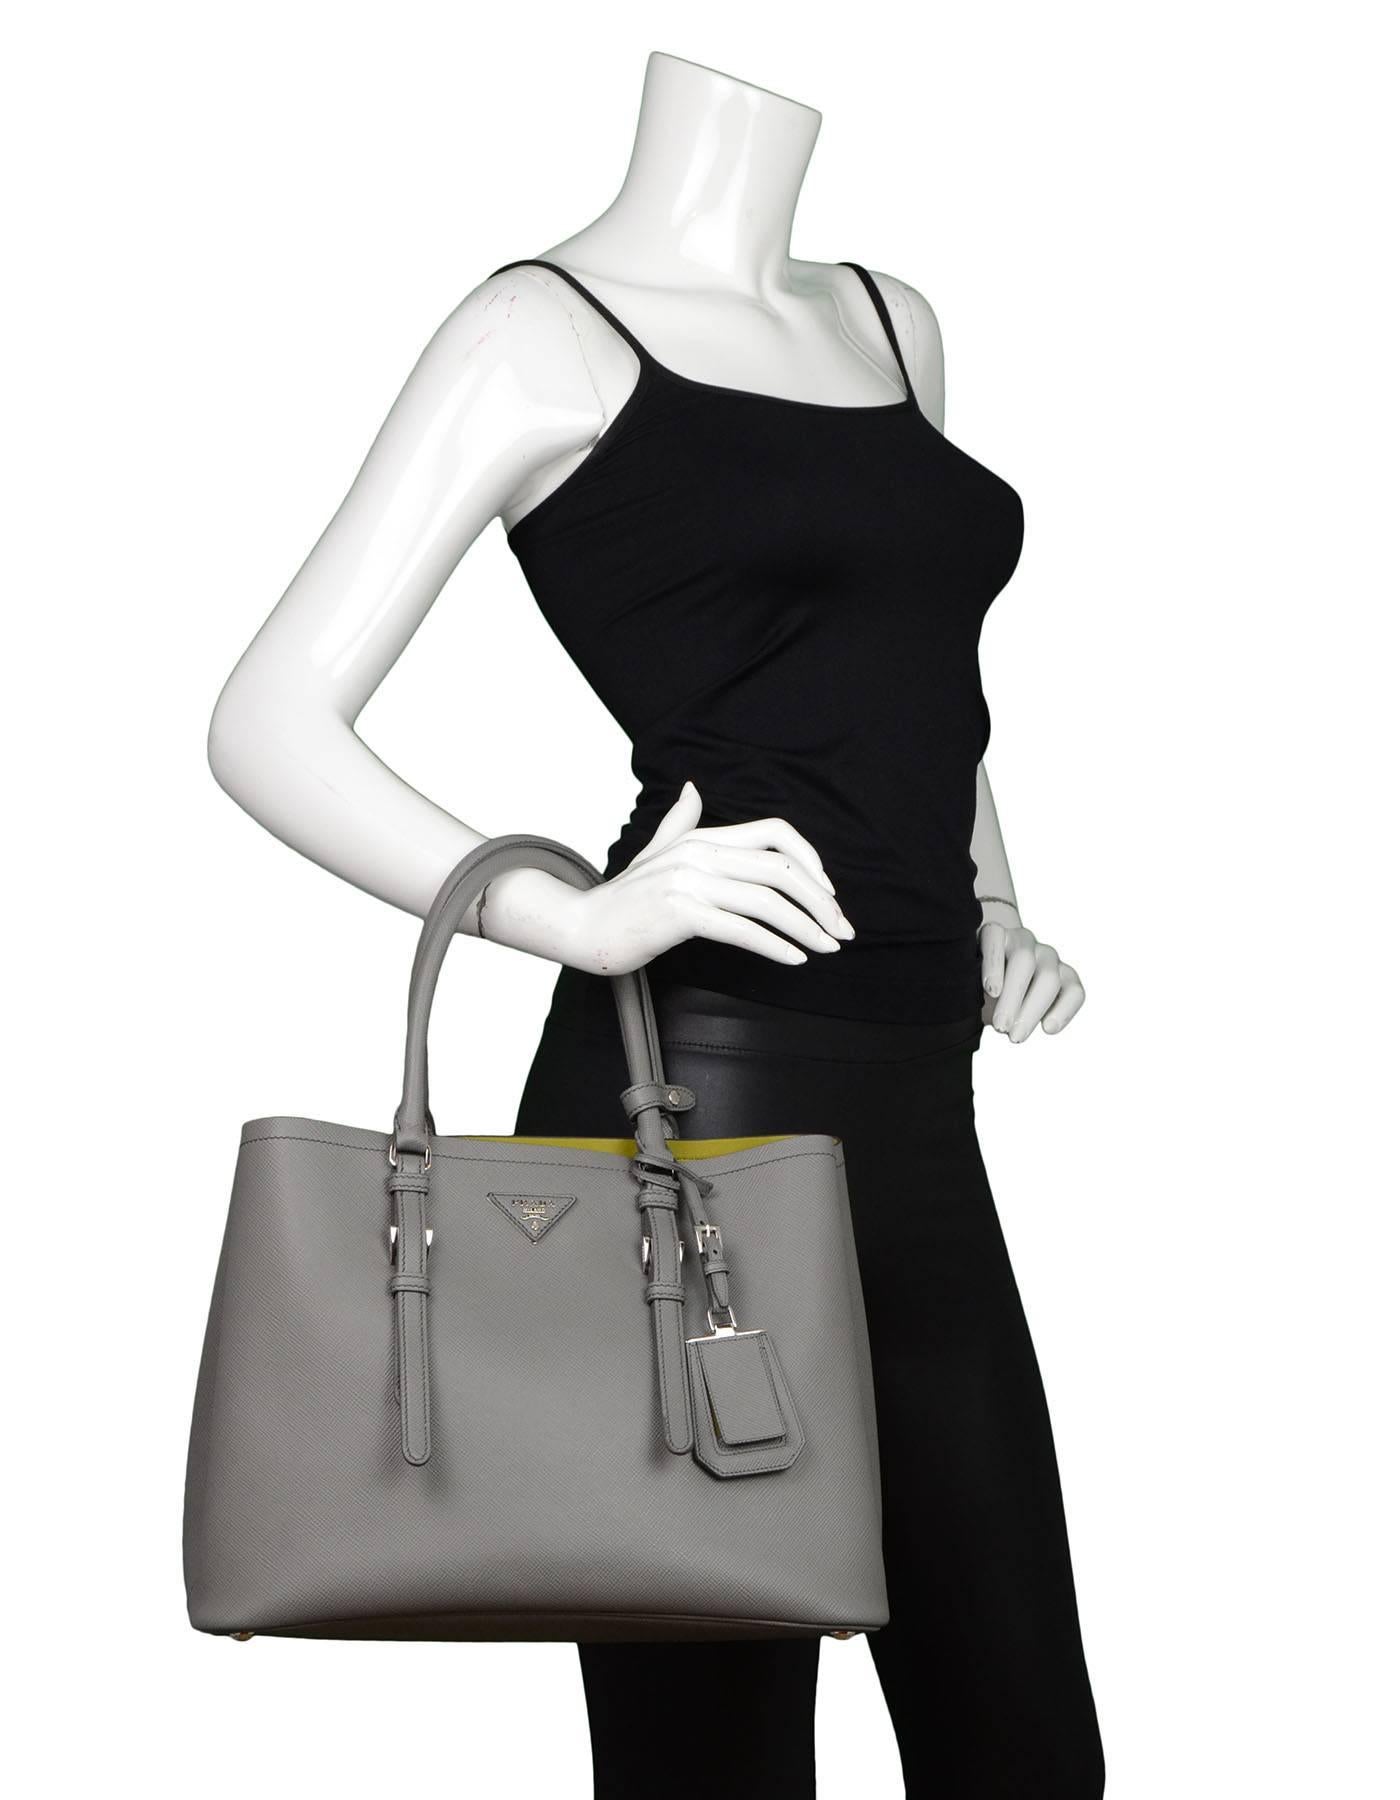 Prada Grey Saffiano Medium Double Tote 
Features contrast green leather interior and optional shoulder/crossbody strap

Made In: Italy
Year of Production: 2015
Color: Grey
Hardware: Silvertone
Materials: Saffiano leather
Lining: Green soft